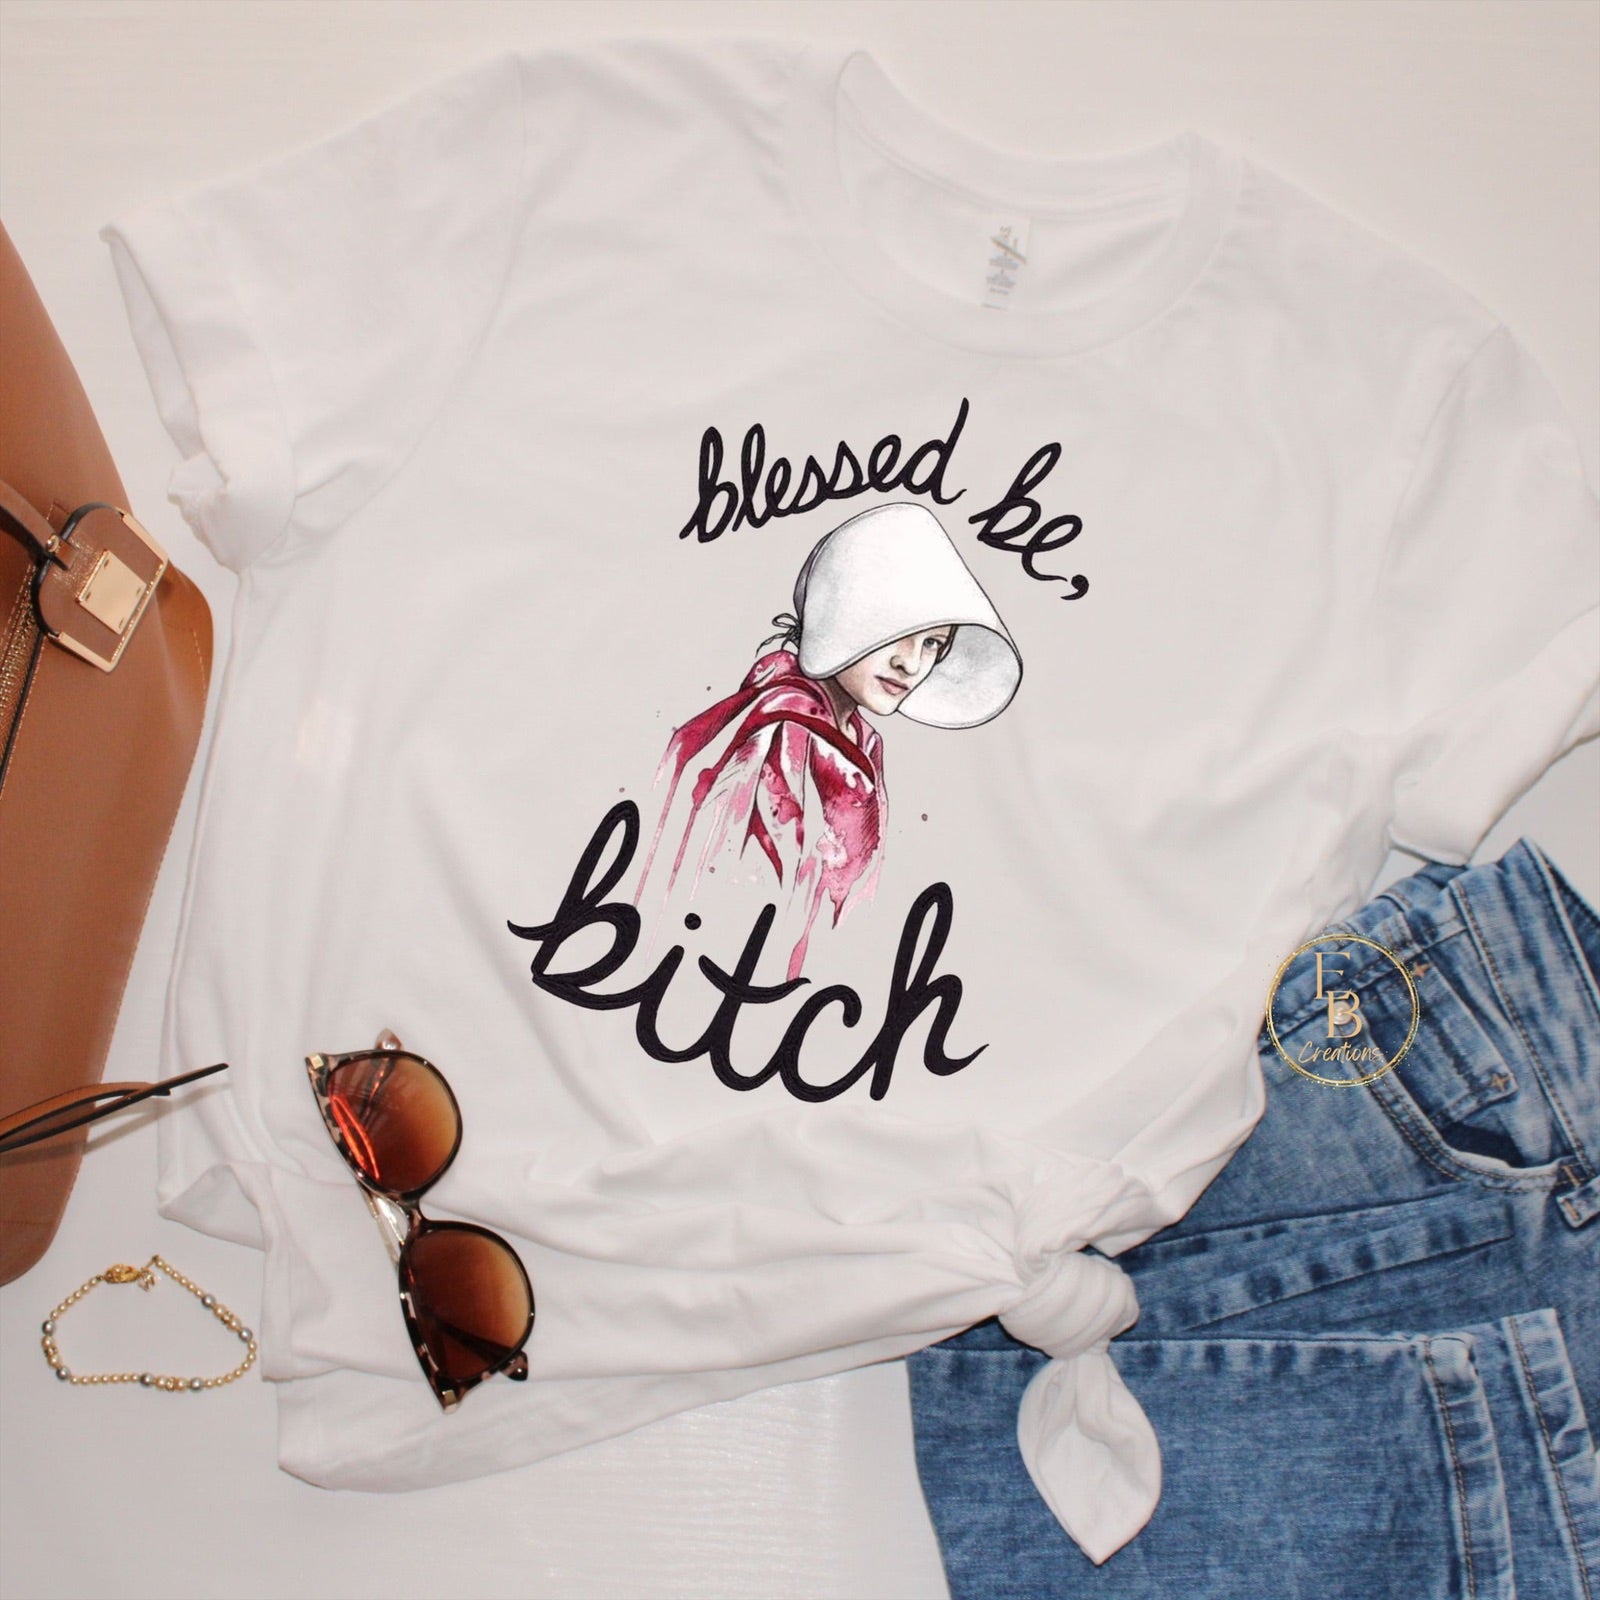 Blessed be Bitch graphic T-shirt | Funny Tee for daily wear - Eb Creations Blessed be Bitch graphic T-shirt | Funny Tee for daily wear